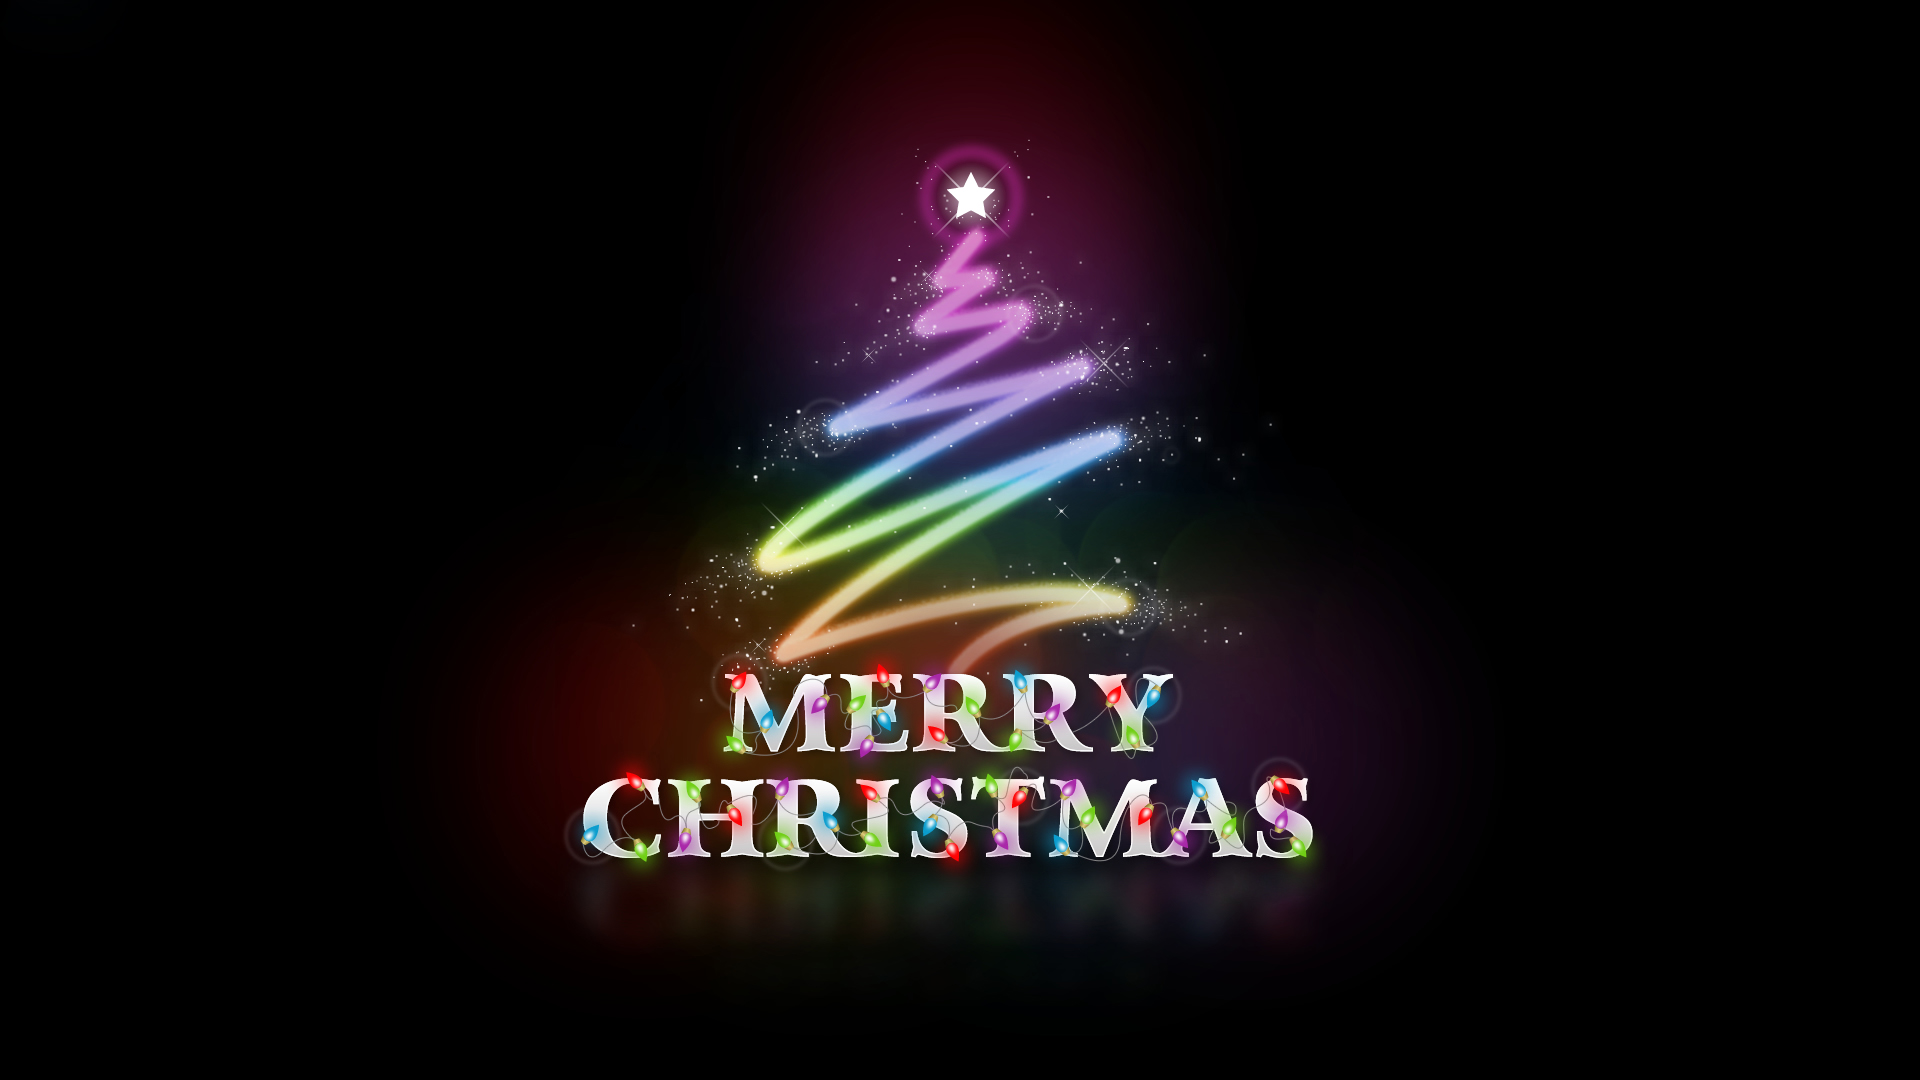 Colorful Merry Christmas Hd Wallpaper - Cool Merry Christmas Backgrounds - HD Wallpaper 